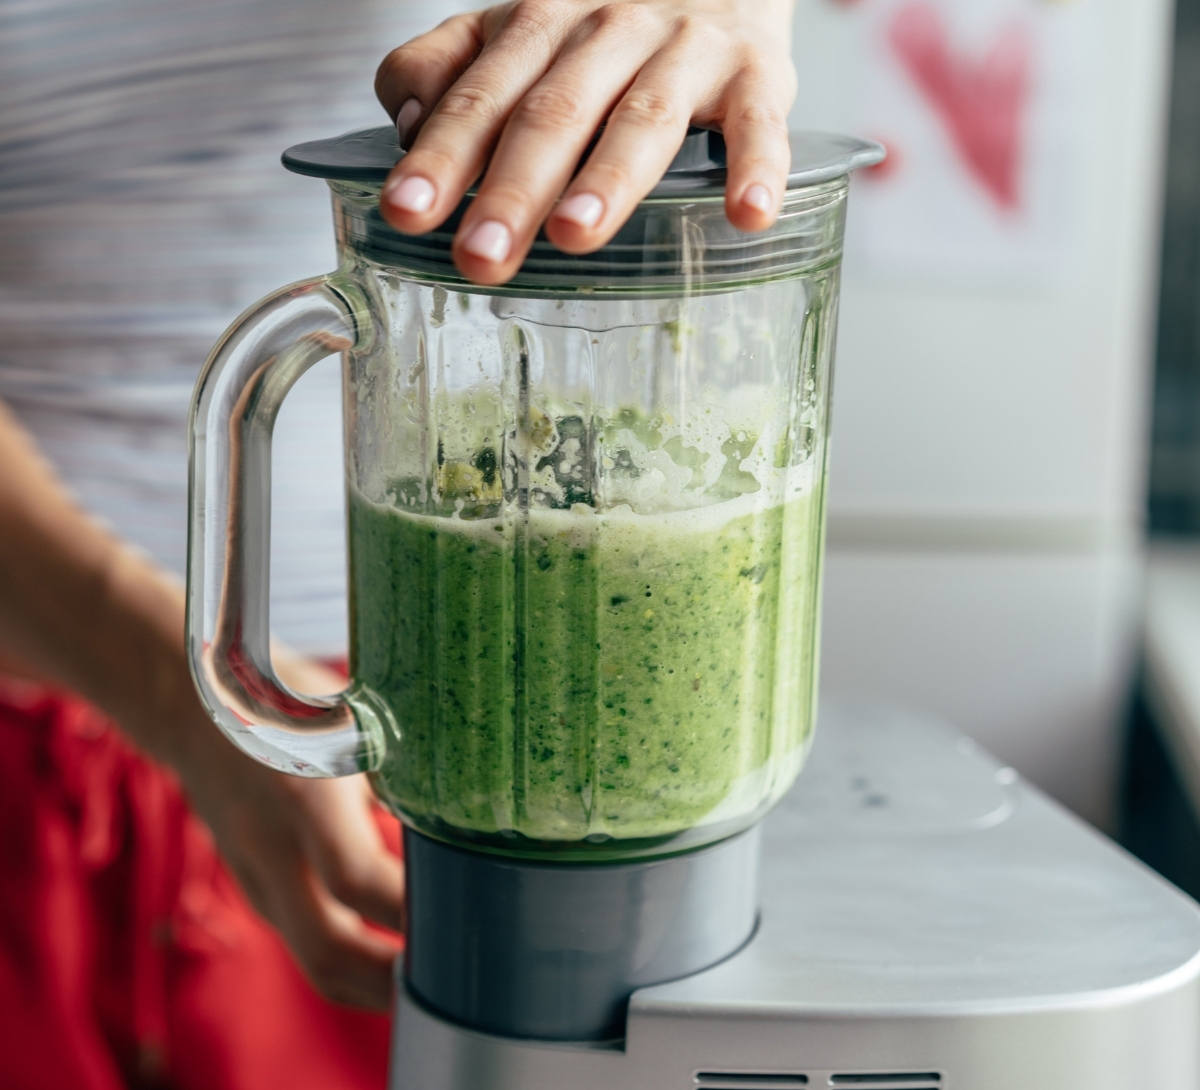 How to make broccoli puree in a blender.